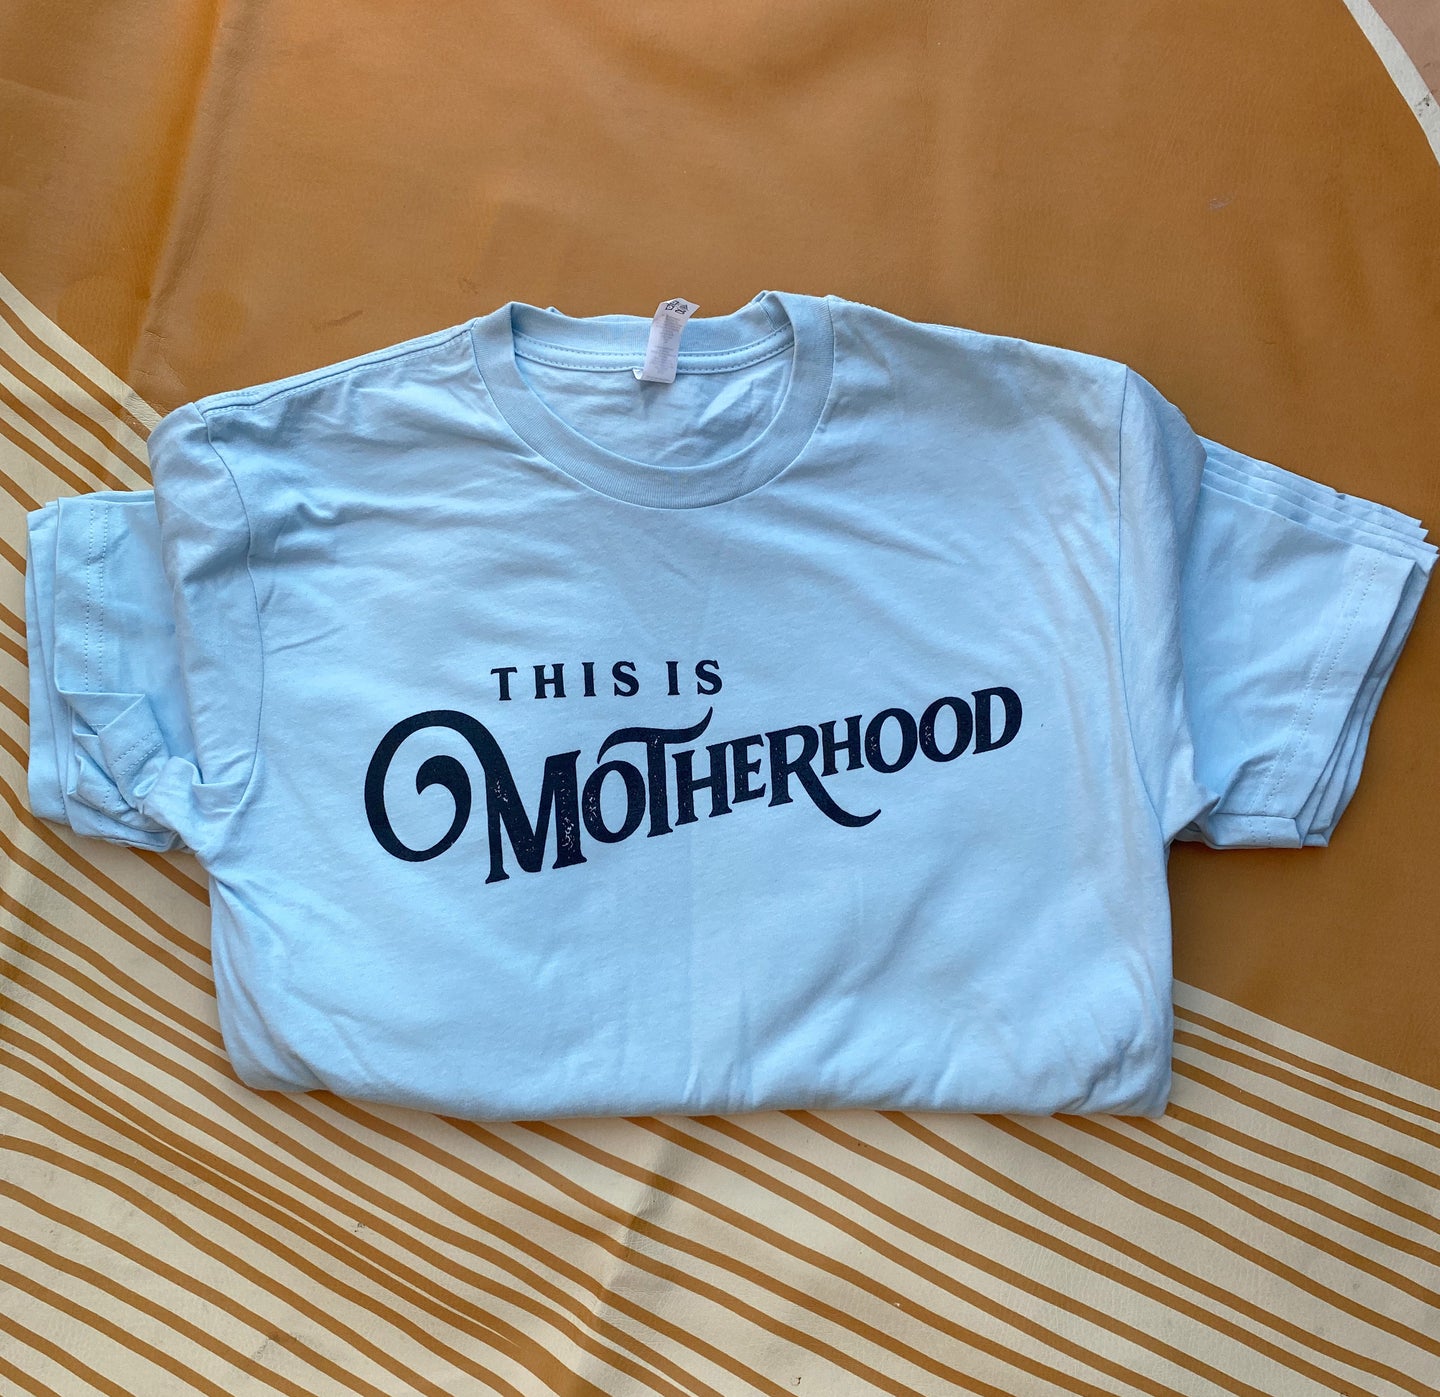 This is Motherhood - Baby Blue - Unisex Short Sleeve Tee [READY TO SHIP]